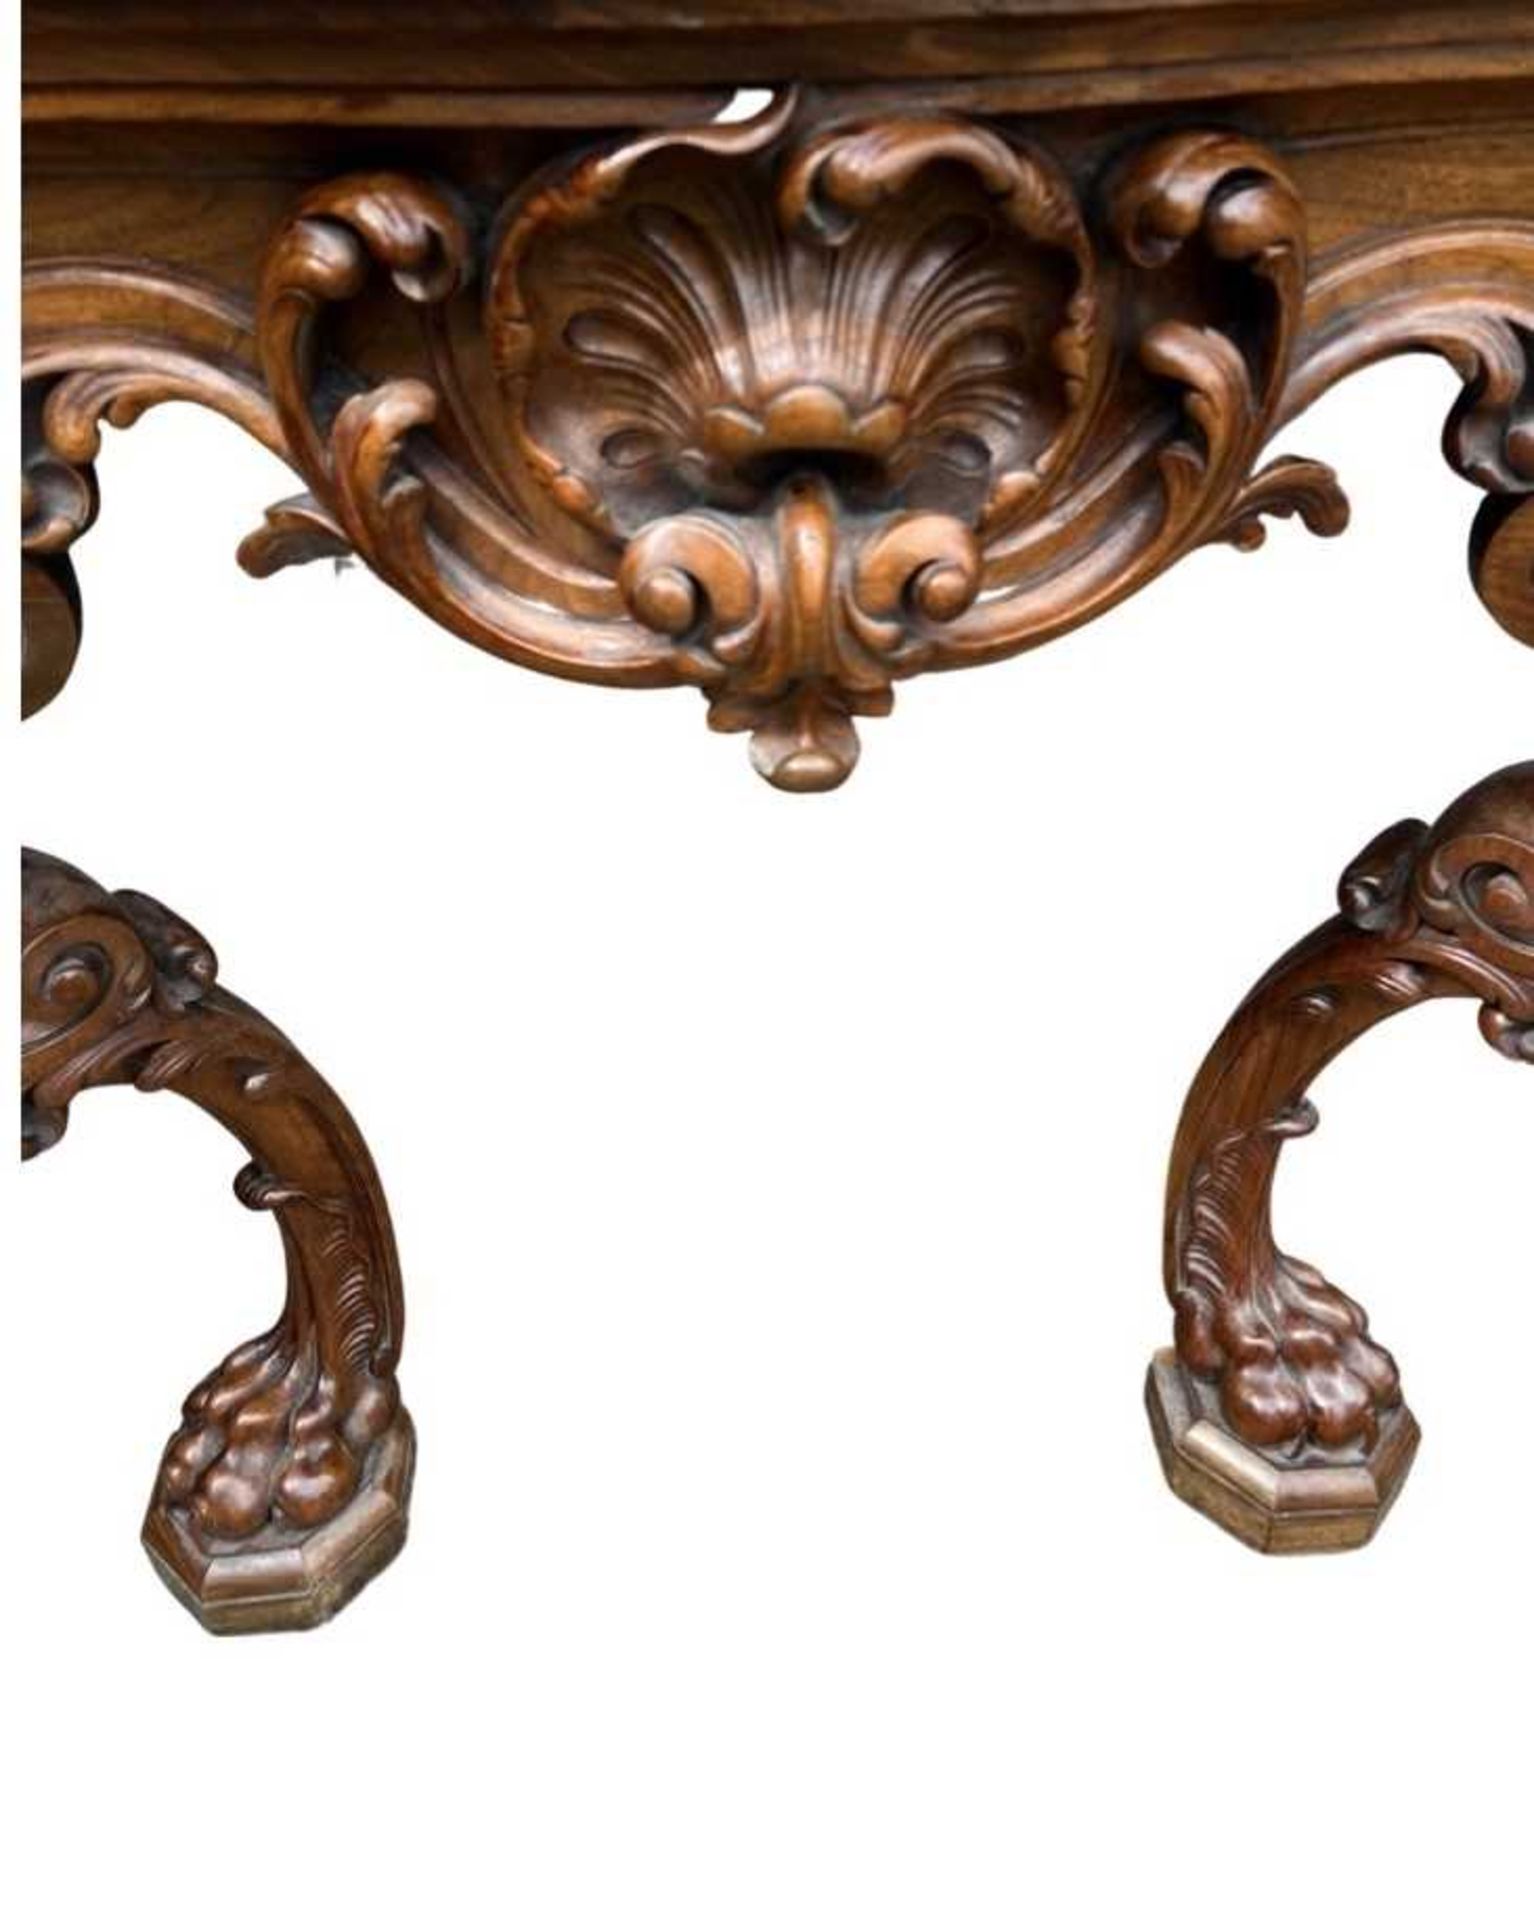 A FINE 19TH CENTURY IRISH WALNUT AND MARBLE CONSOLE TABLE - Image 5 of 5